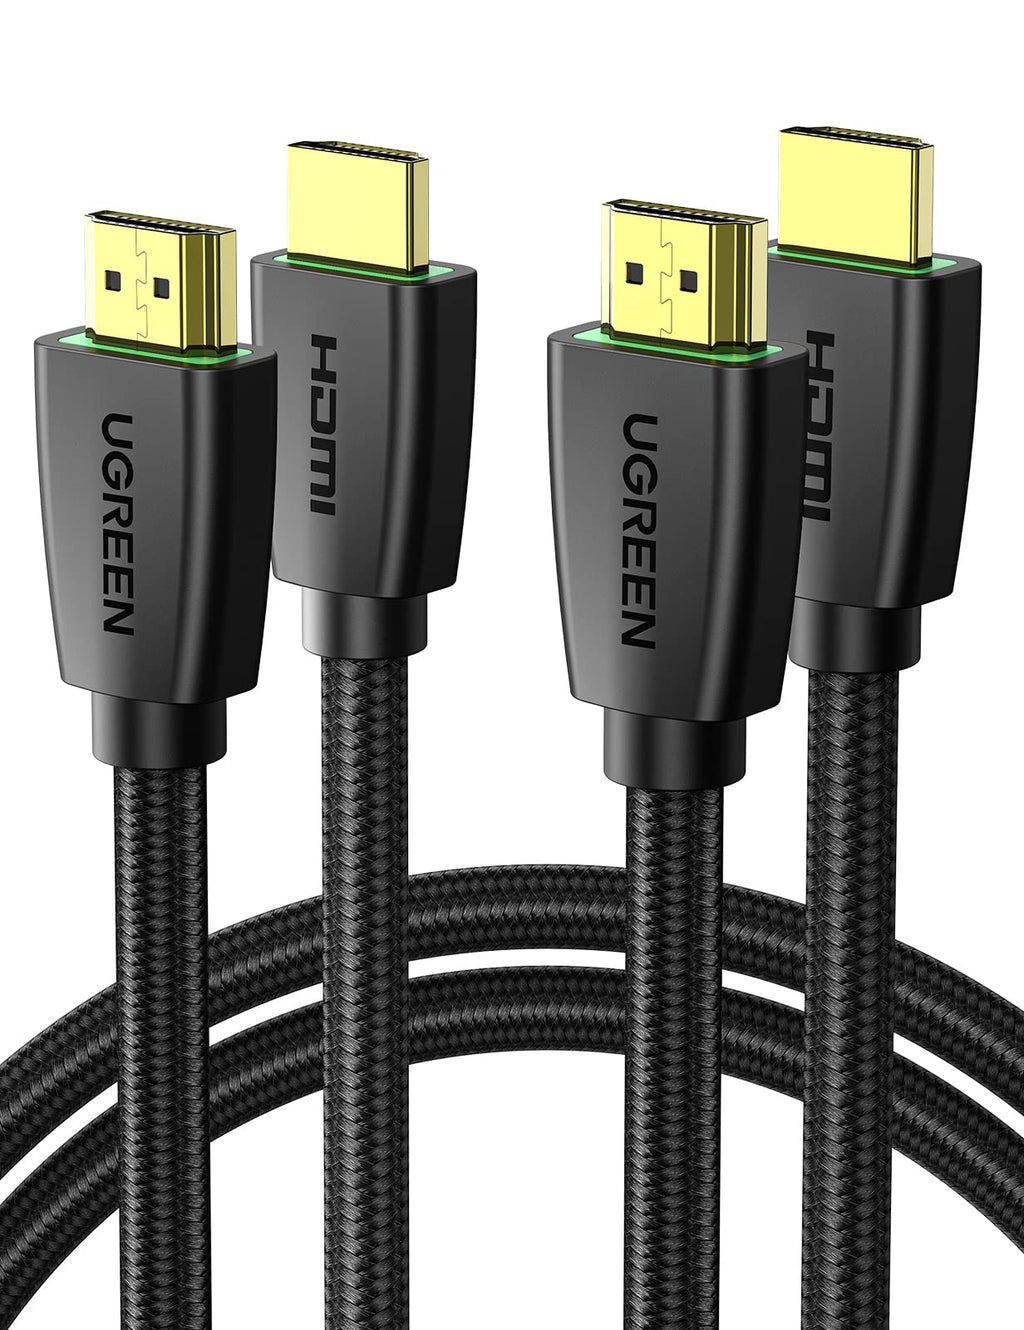 UGREEN 2 Pack HDMI Cable 4K Braided High Speed HDMI Cord 18Gbps with Ethernet Support 4K 60HZ Compatible with UHD TV Monitor Computer PS5 PS4 Blu-ray and More 6FT